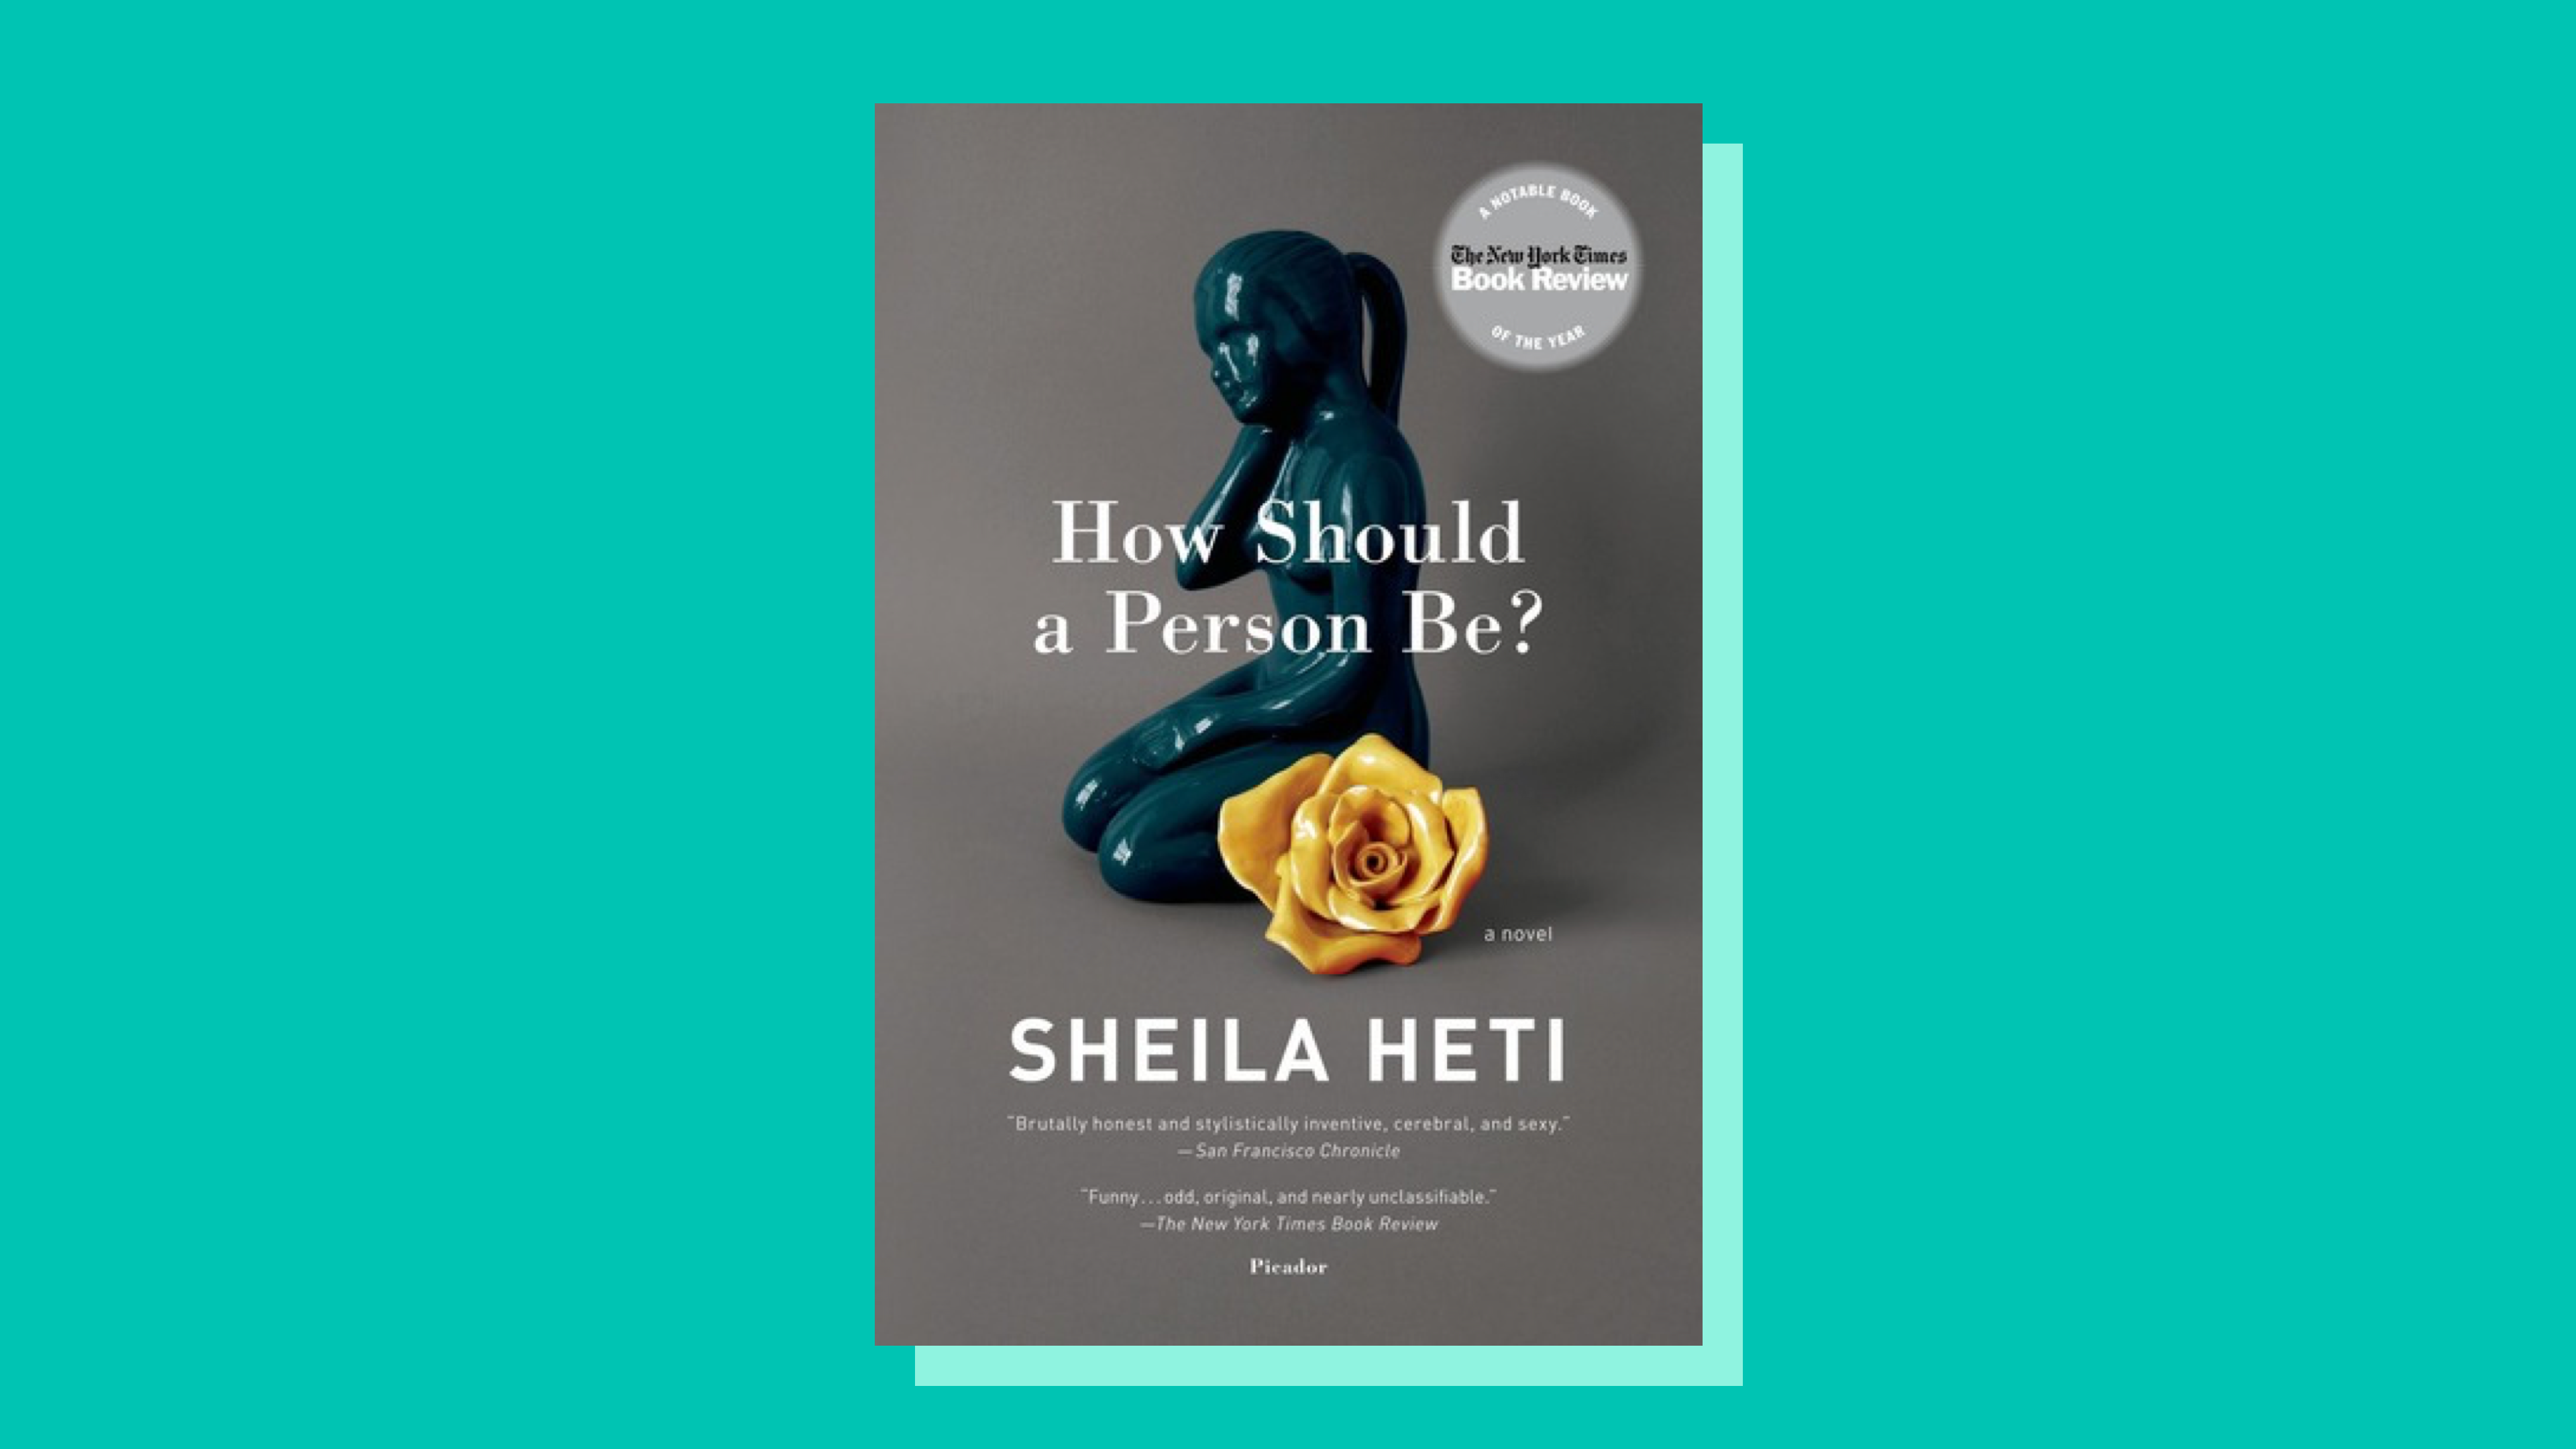 “How Should A Person Be?” by Sheila Heti